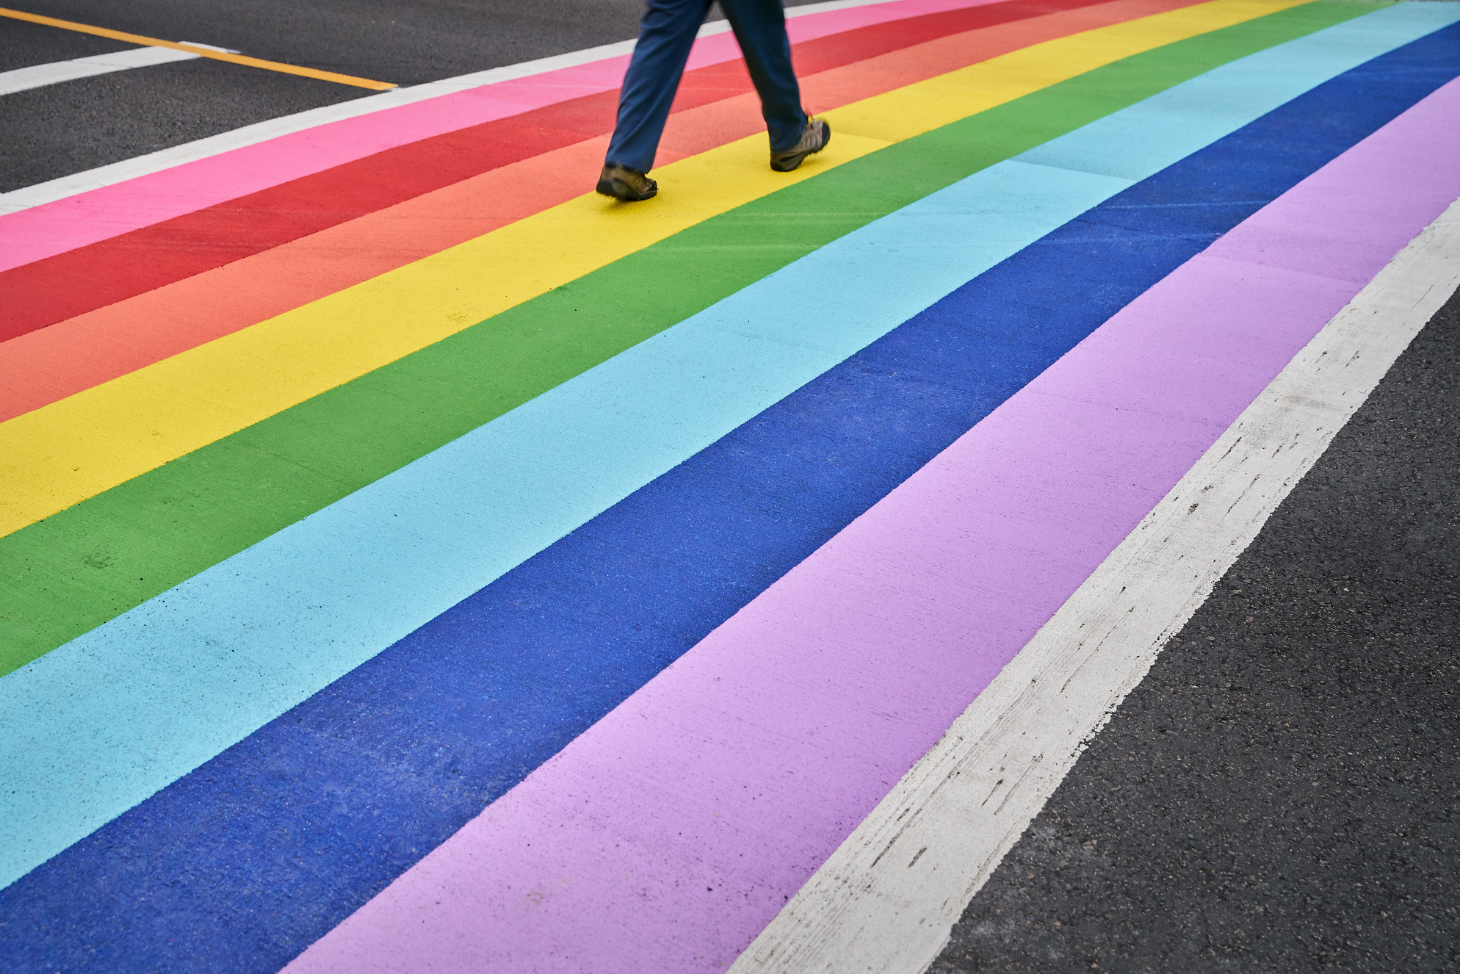 View of a person crossing the street on a rainbow crosswalk